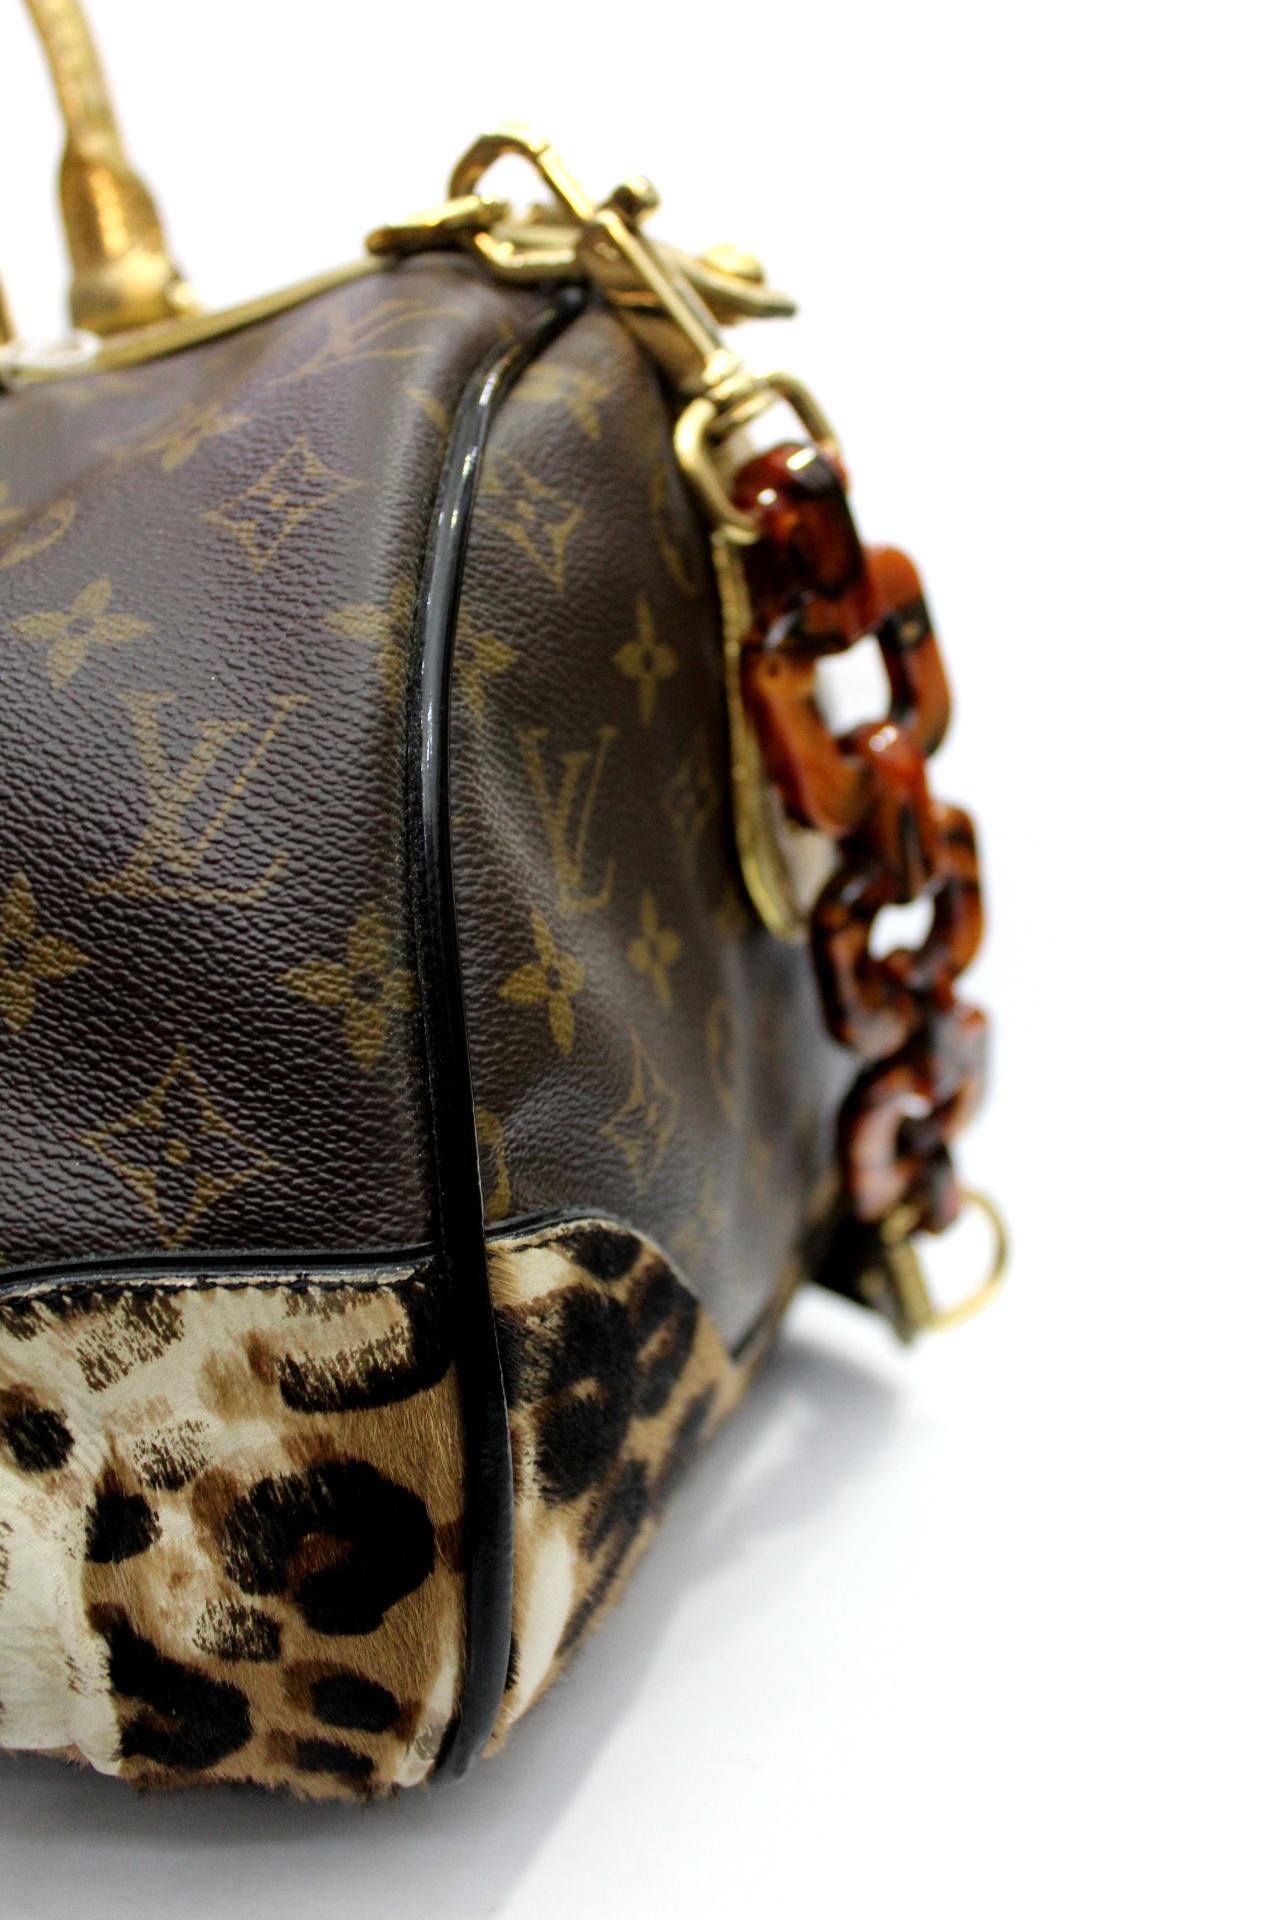 The stunning Monogram Leopard Stephen bag is named after its creator, artist Stephen Sprouse. Produced in very limited quantities and no longer available, the Stephen bag is considered by many to be the pinnacle of the many collaborations between